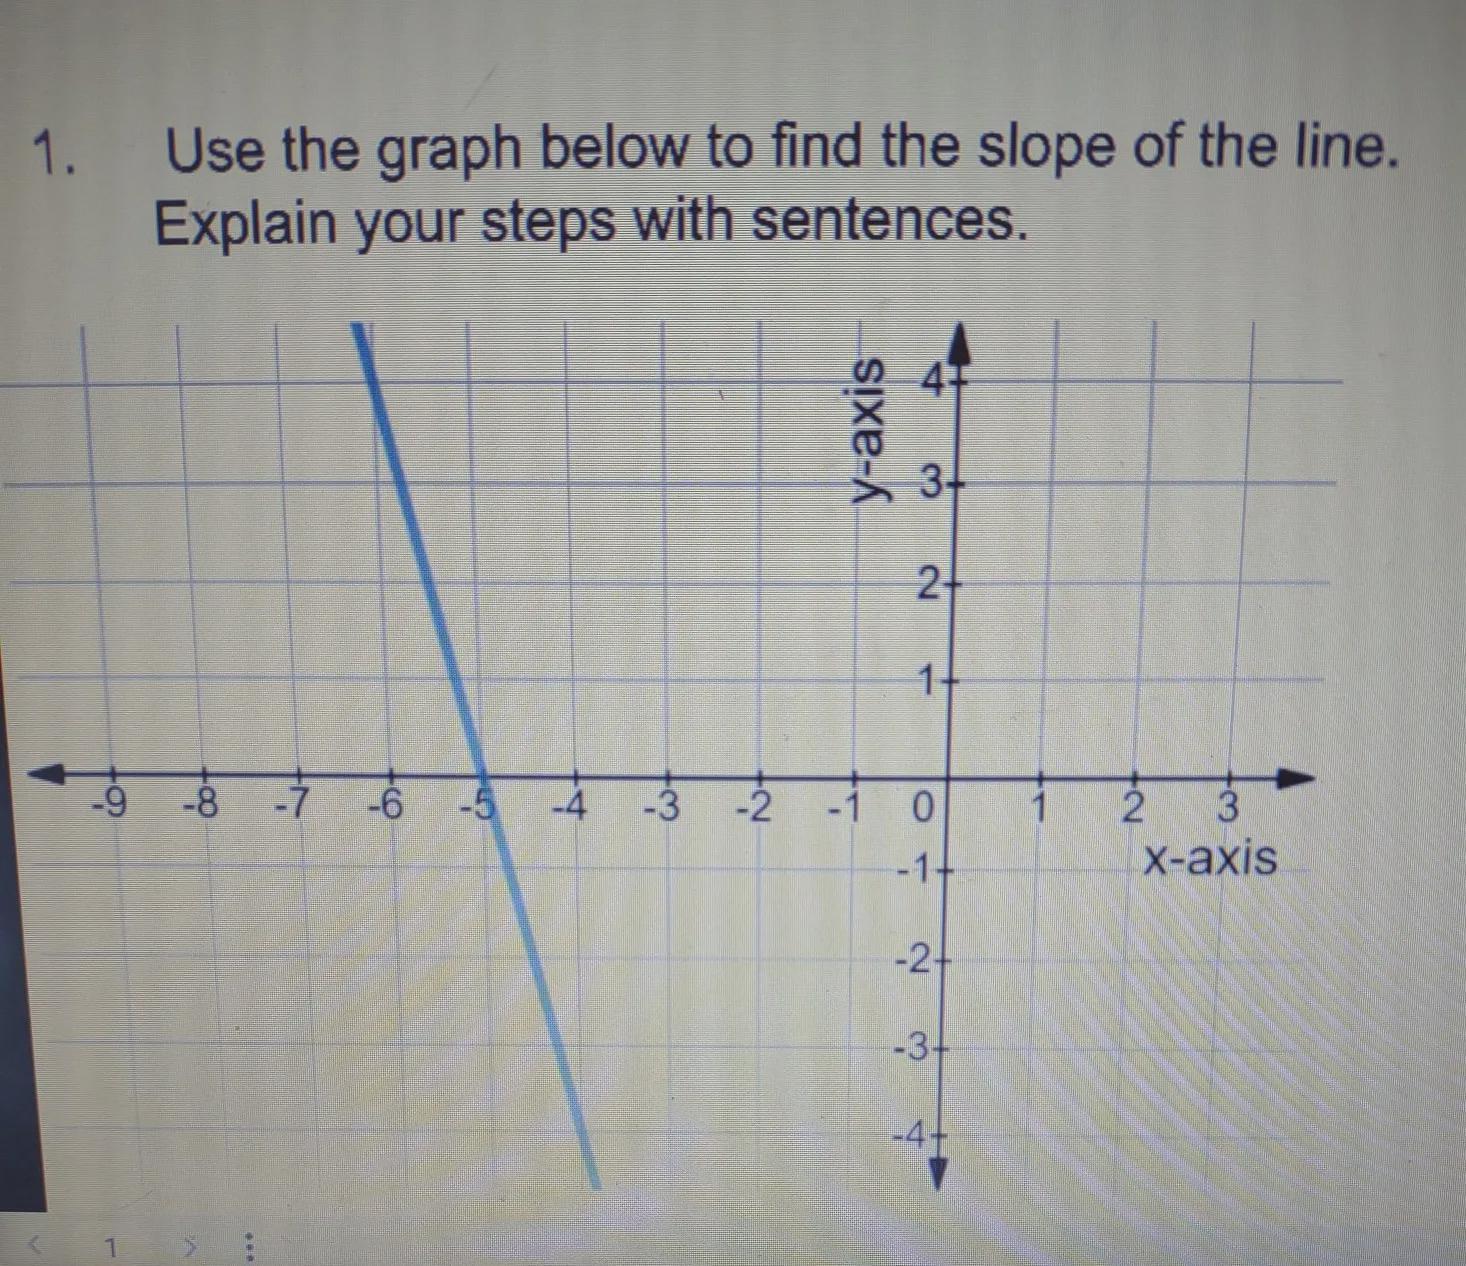 Use The Graph Below To Find The Slope Of The Line. Explain Your Steps With Sentences.